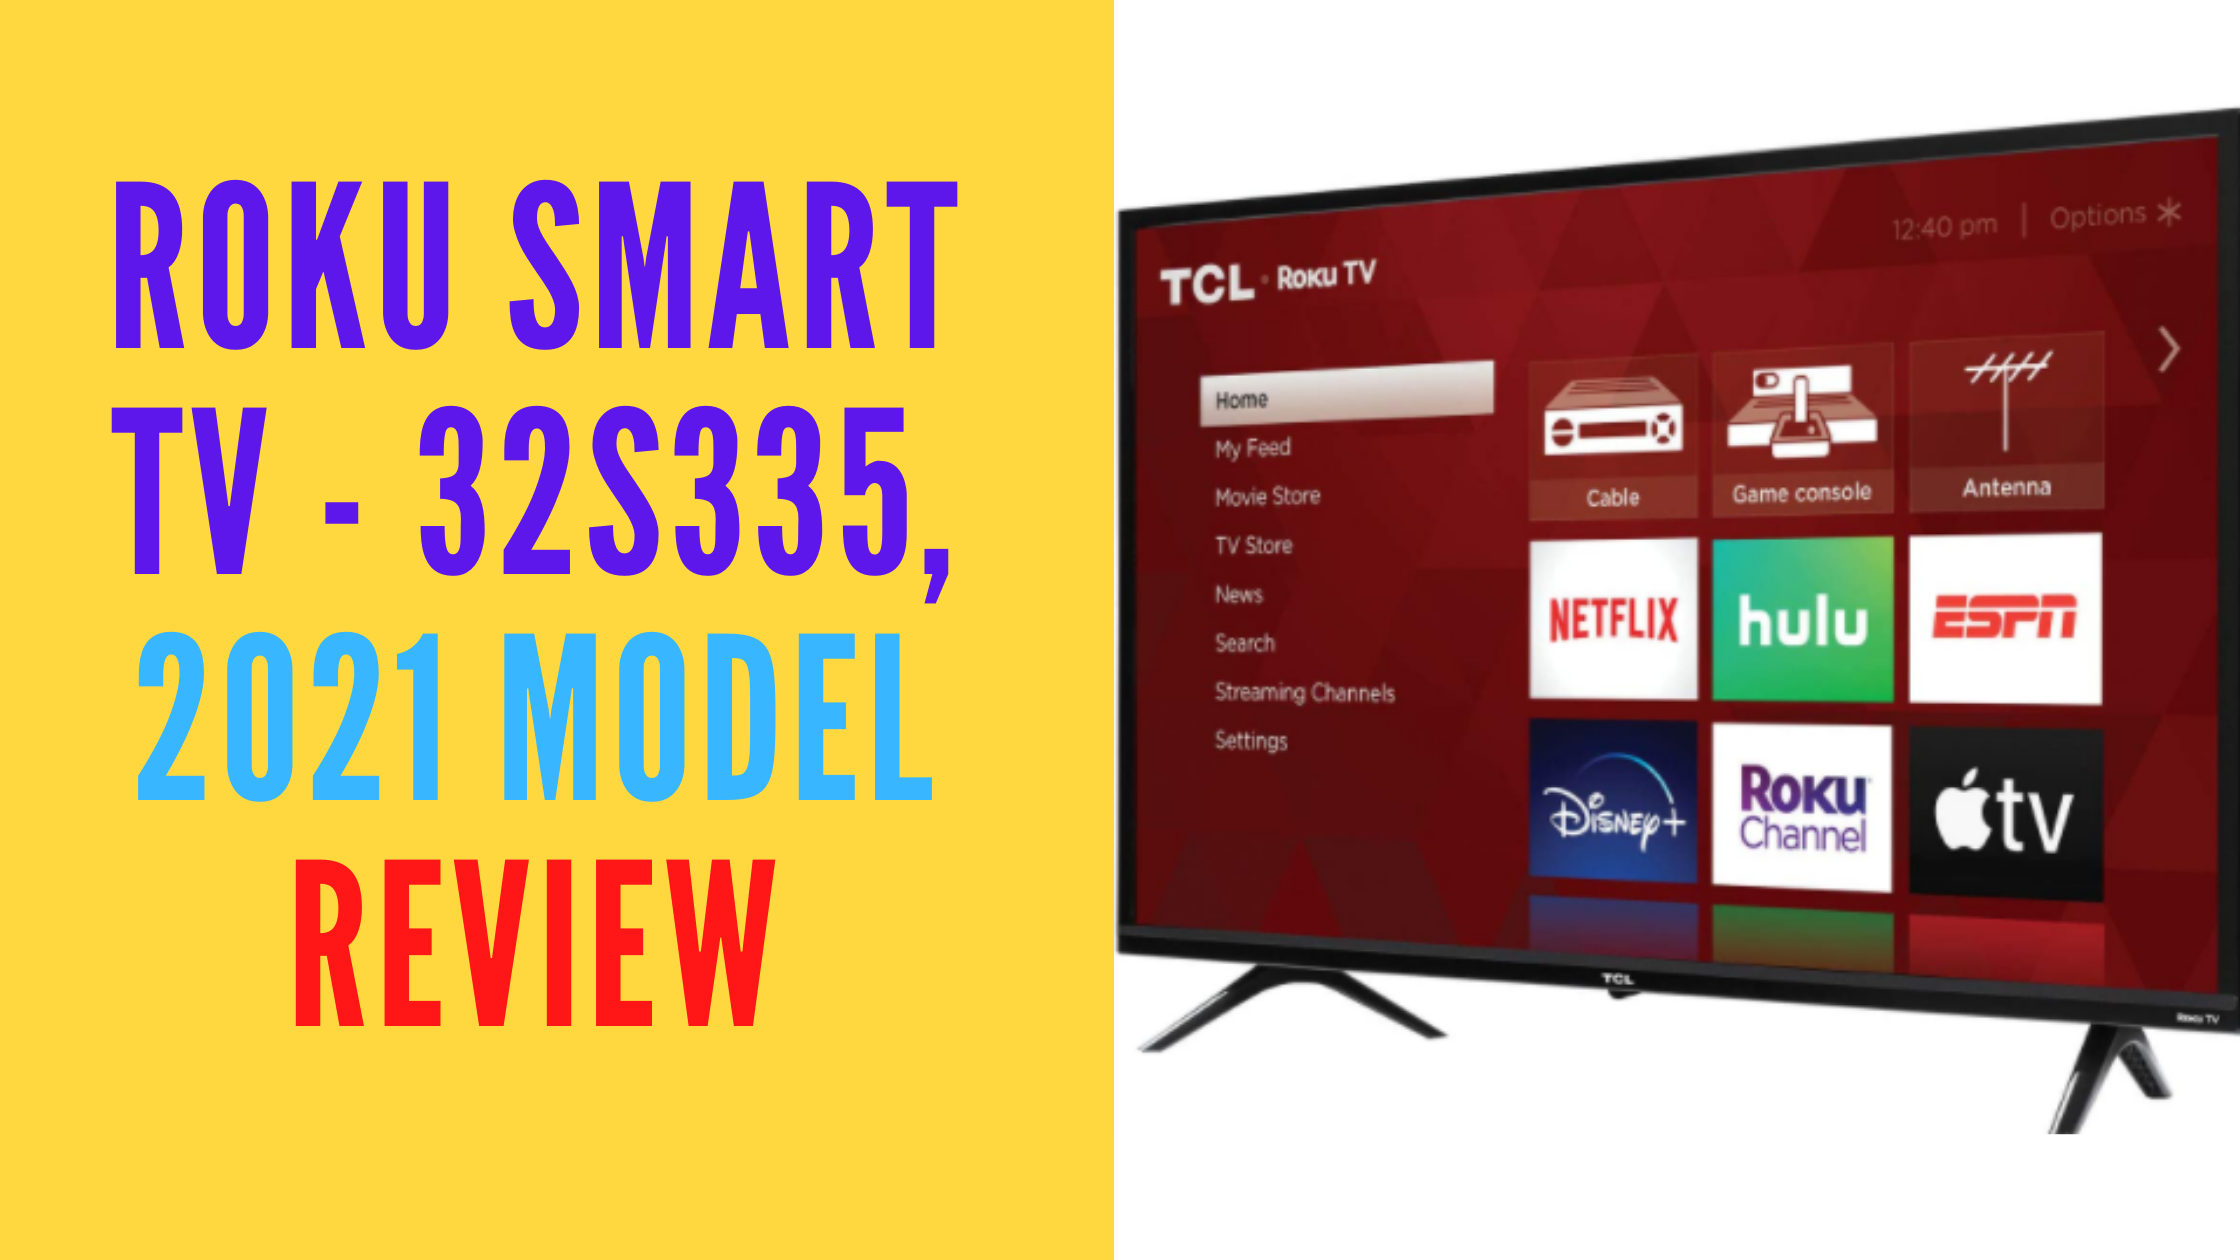 TCL 32-inch 3-Series 720p Roku Smart TV - 32S335, 2021 Model Review